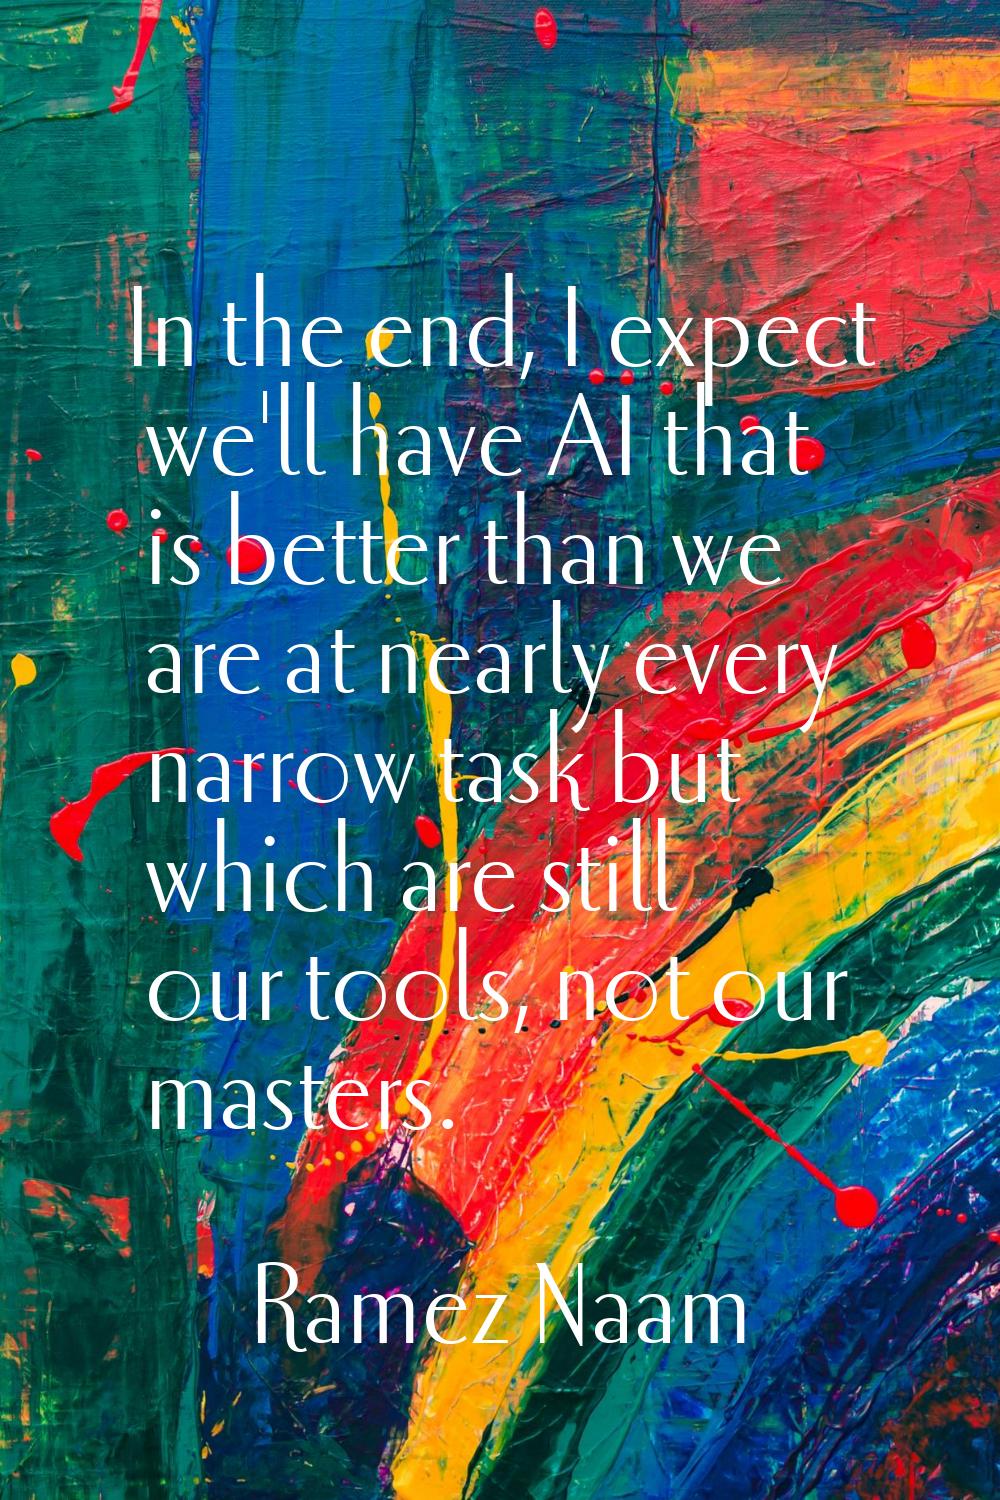 In the end, I expect we'll have AI that is better than we are at nearly every narrow task but which